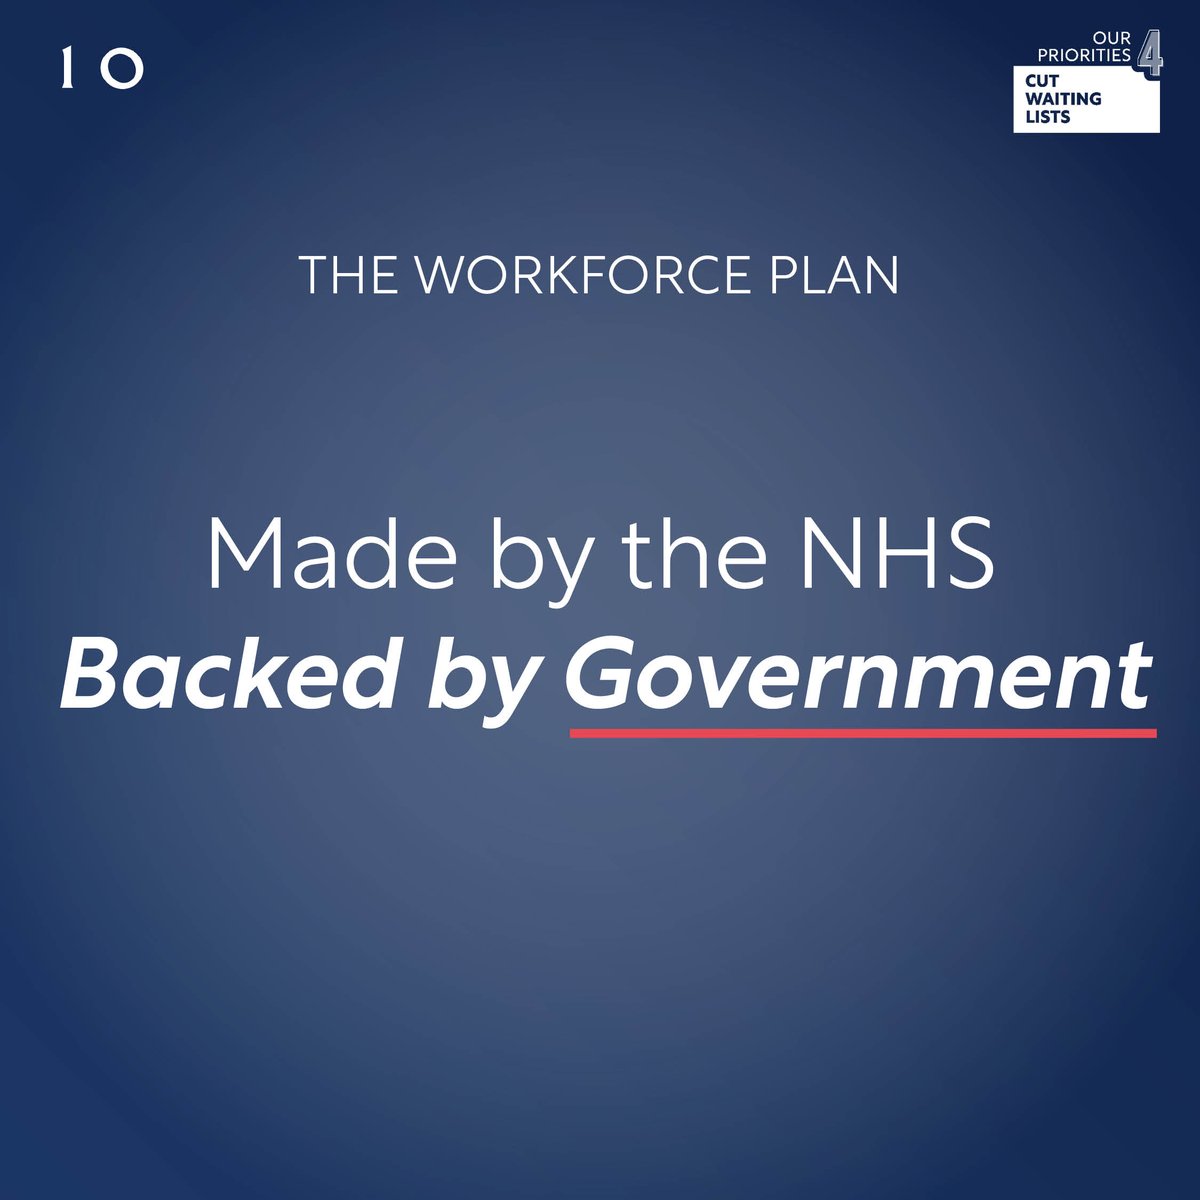 Today we make one of the most significant announcements in NHS history.

We’re setting out a long-term plan to staff the NHS for today and for years to come.

Here’s what it means🧵